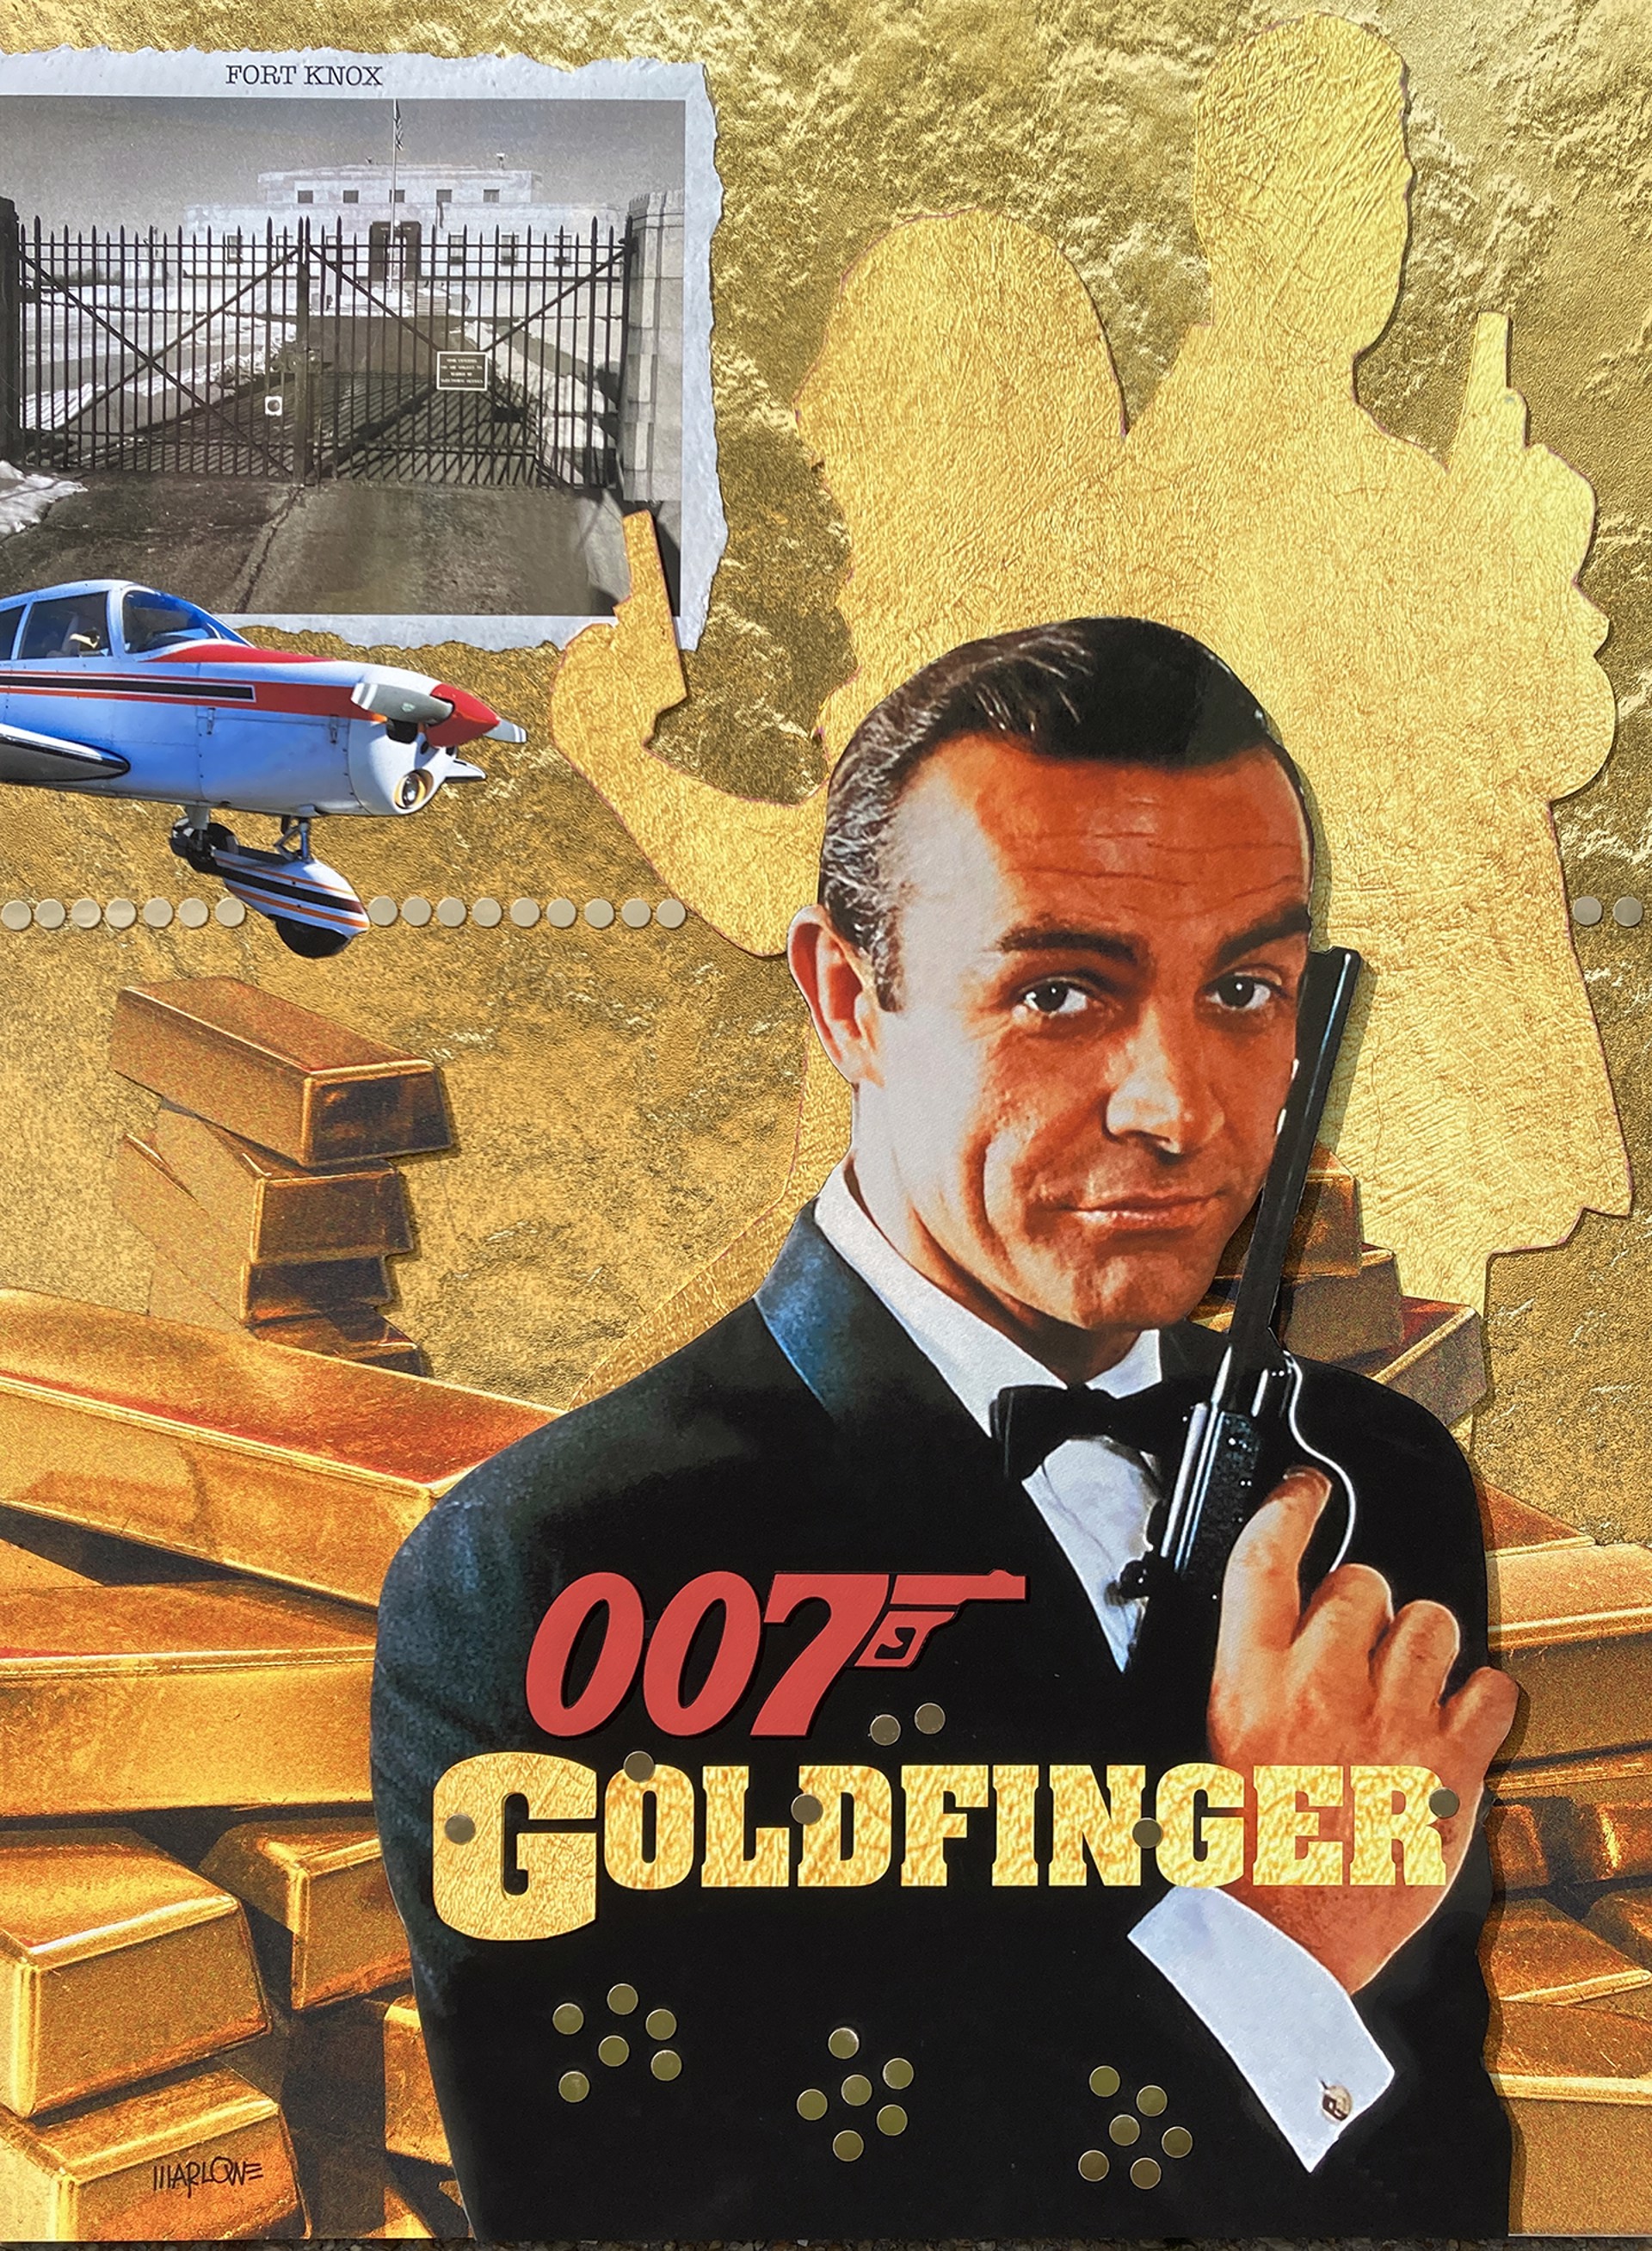 Goldfinger by Marlowe